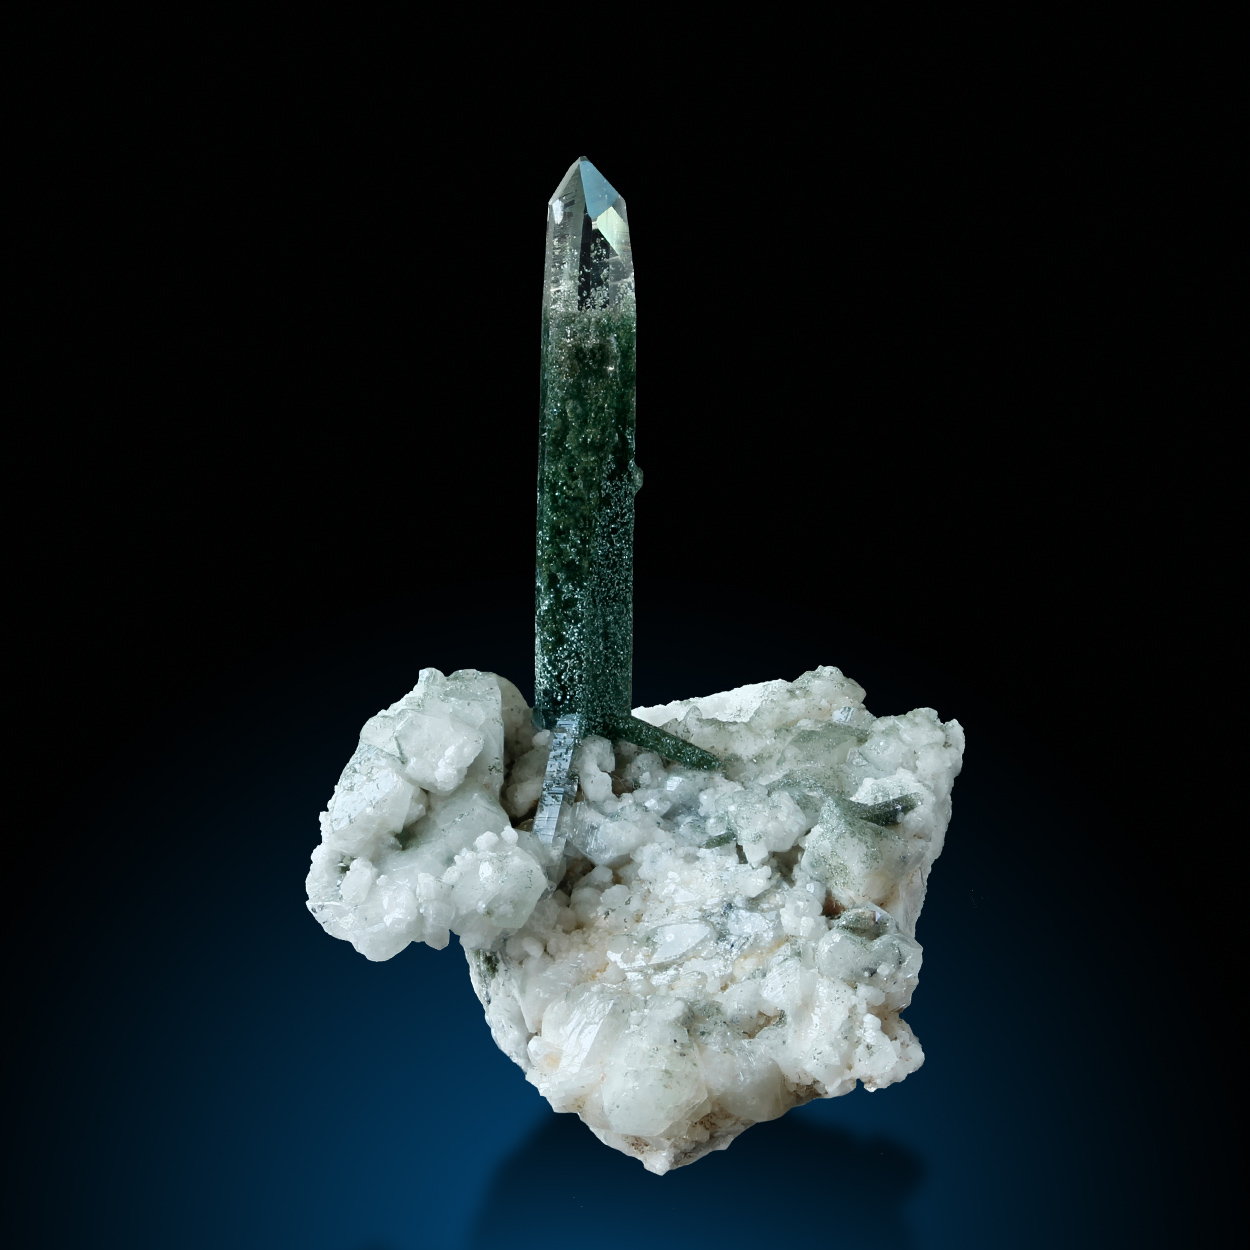 Rock Crystal With Chlorite Inclusions